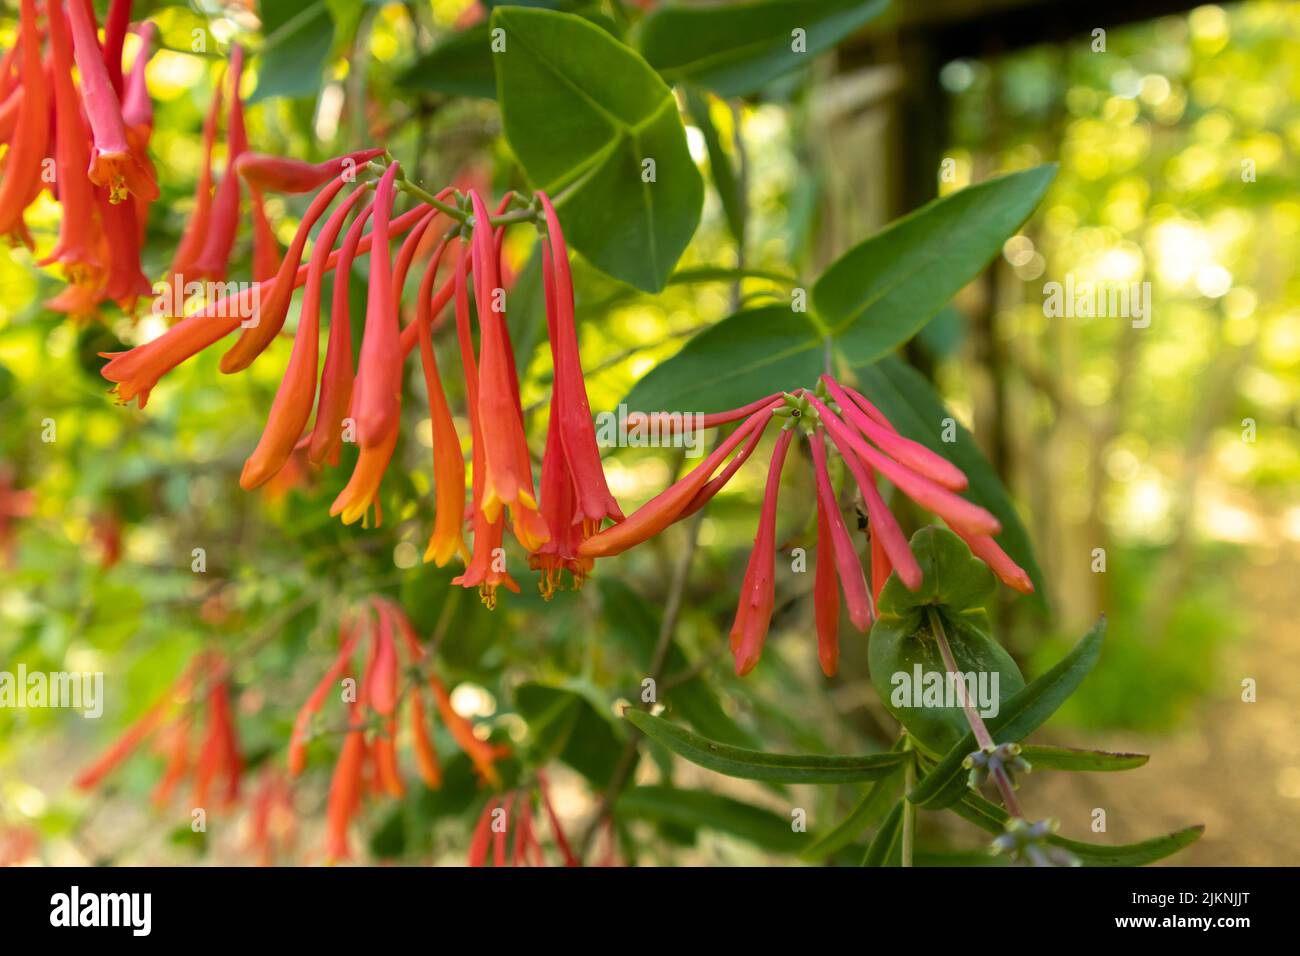 A closeup of a Brown's honeysuckle (Lonicera) bush with bright red flowers and green leaves in spring or summer Stock Photo